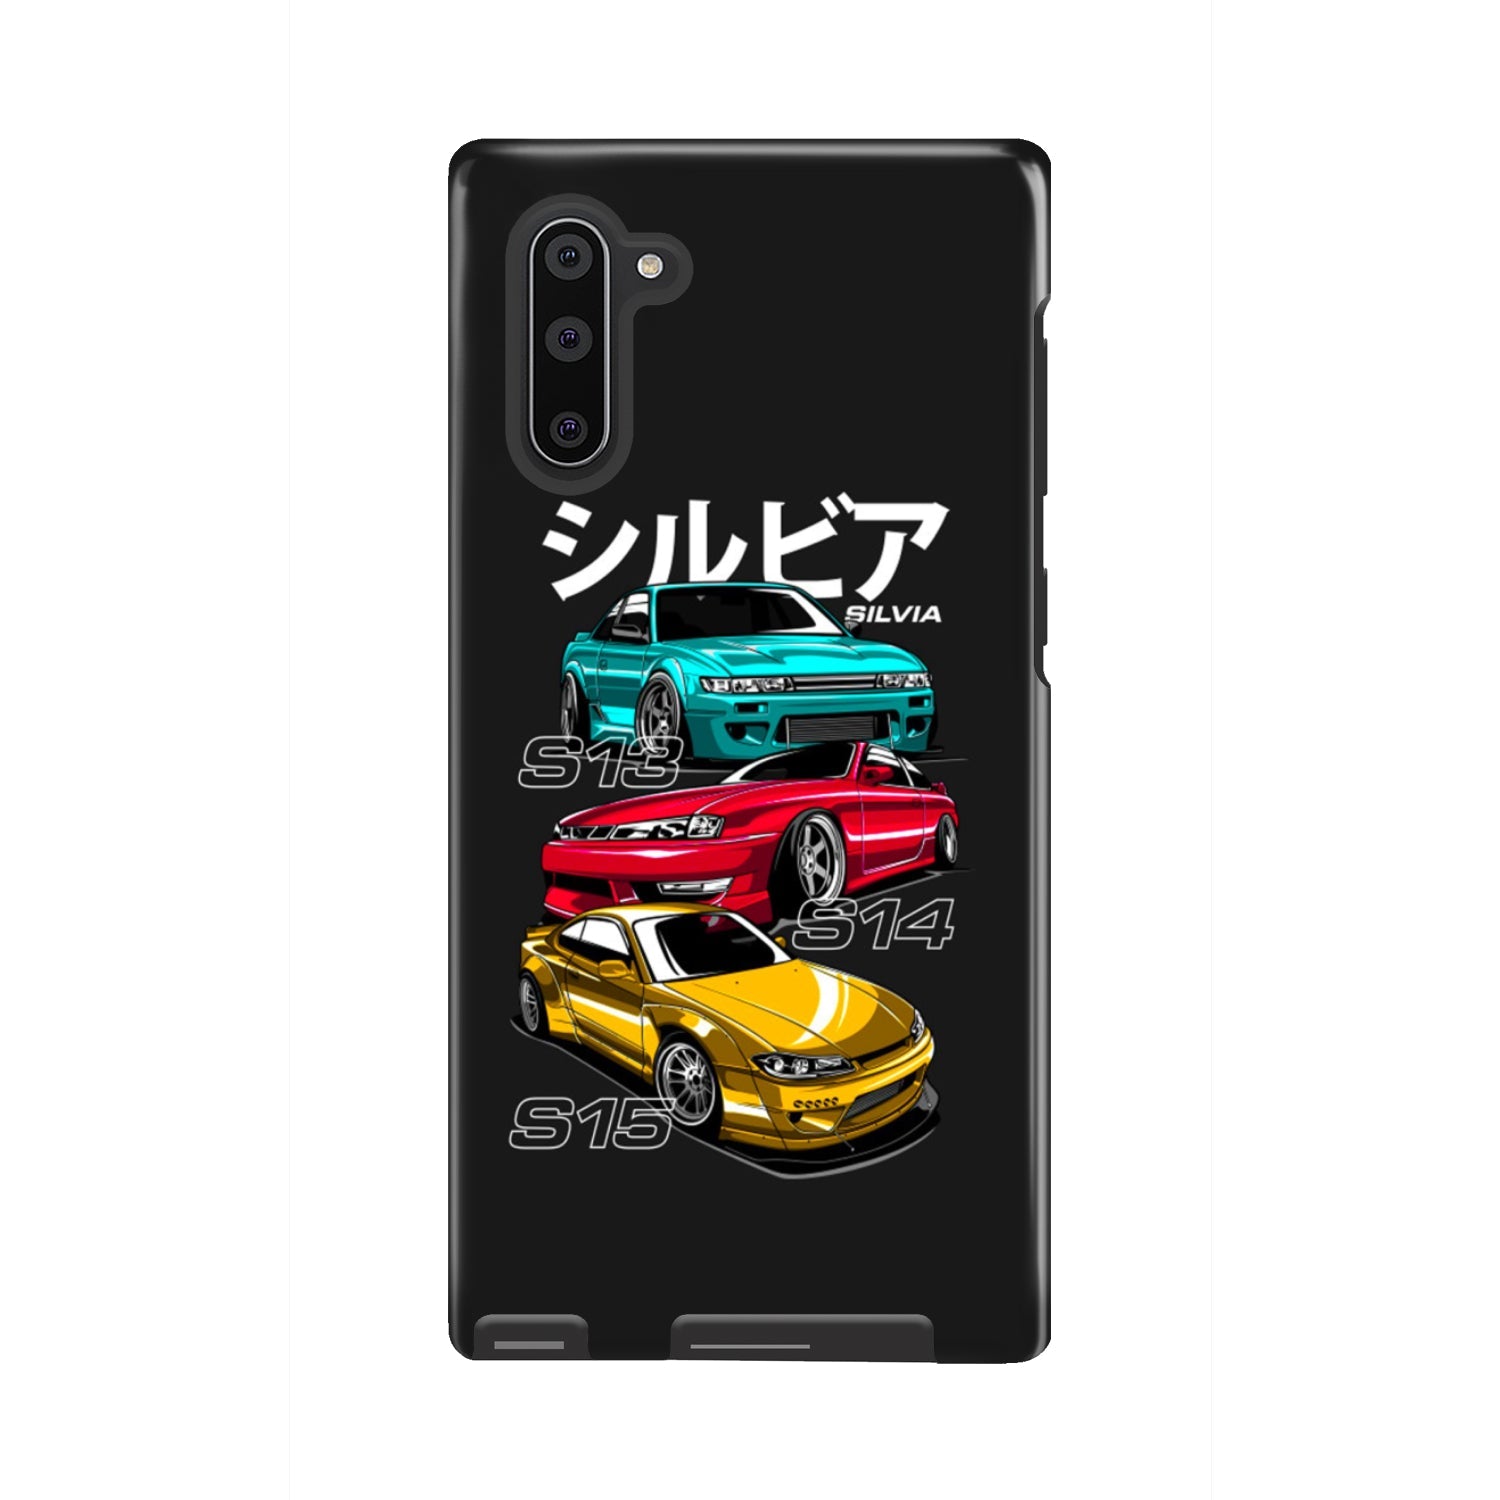 Nissan S Chassis Legends Phone Case